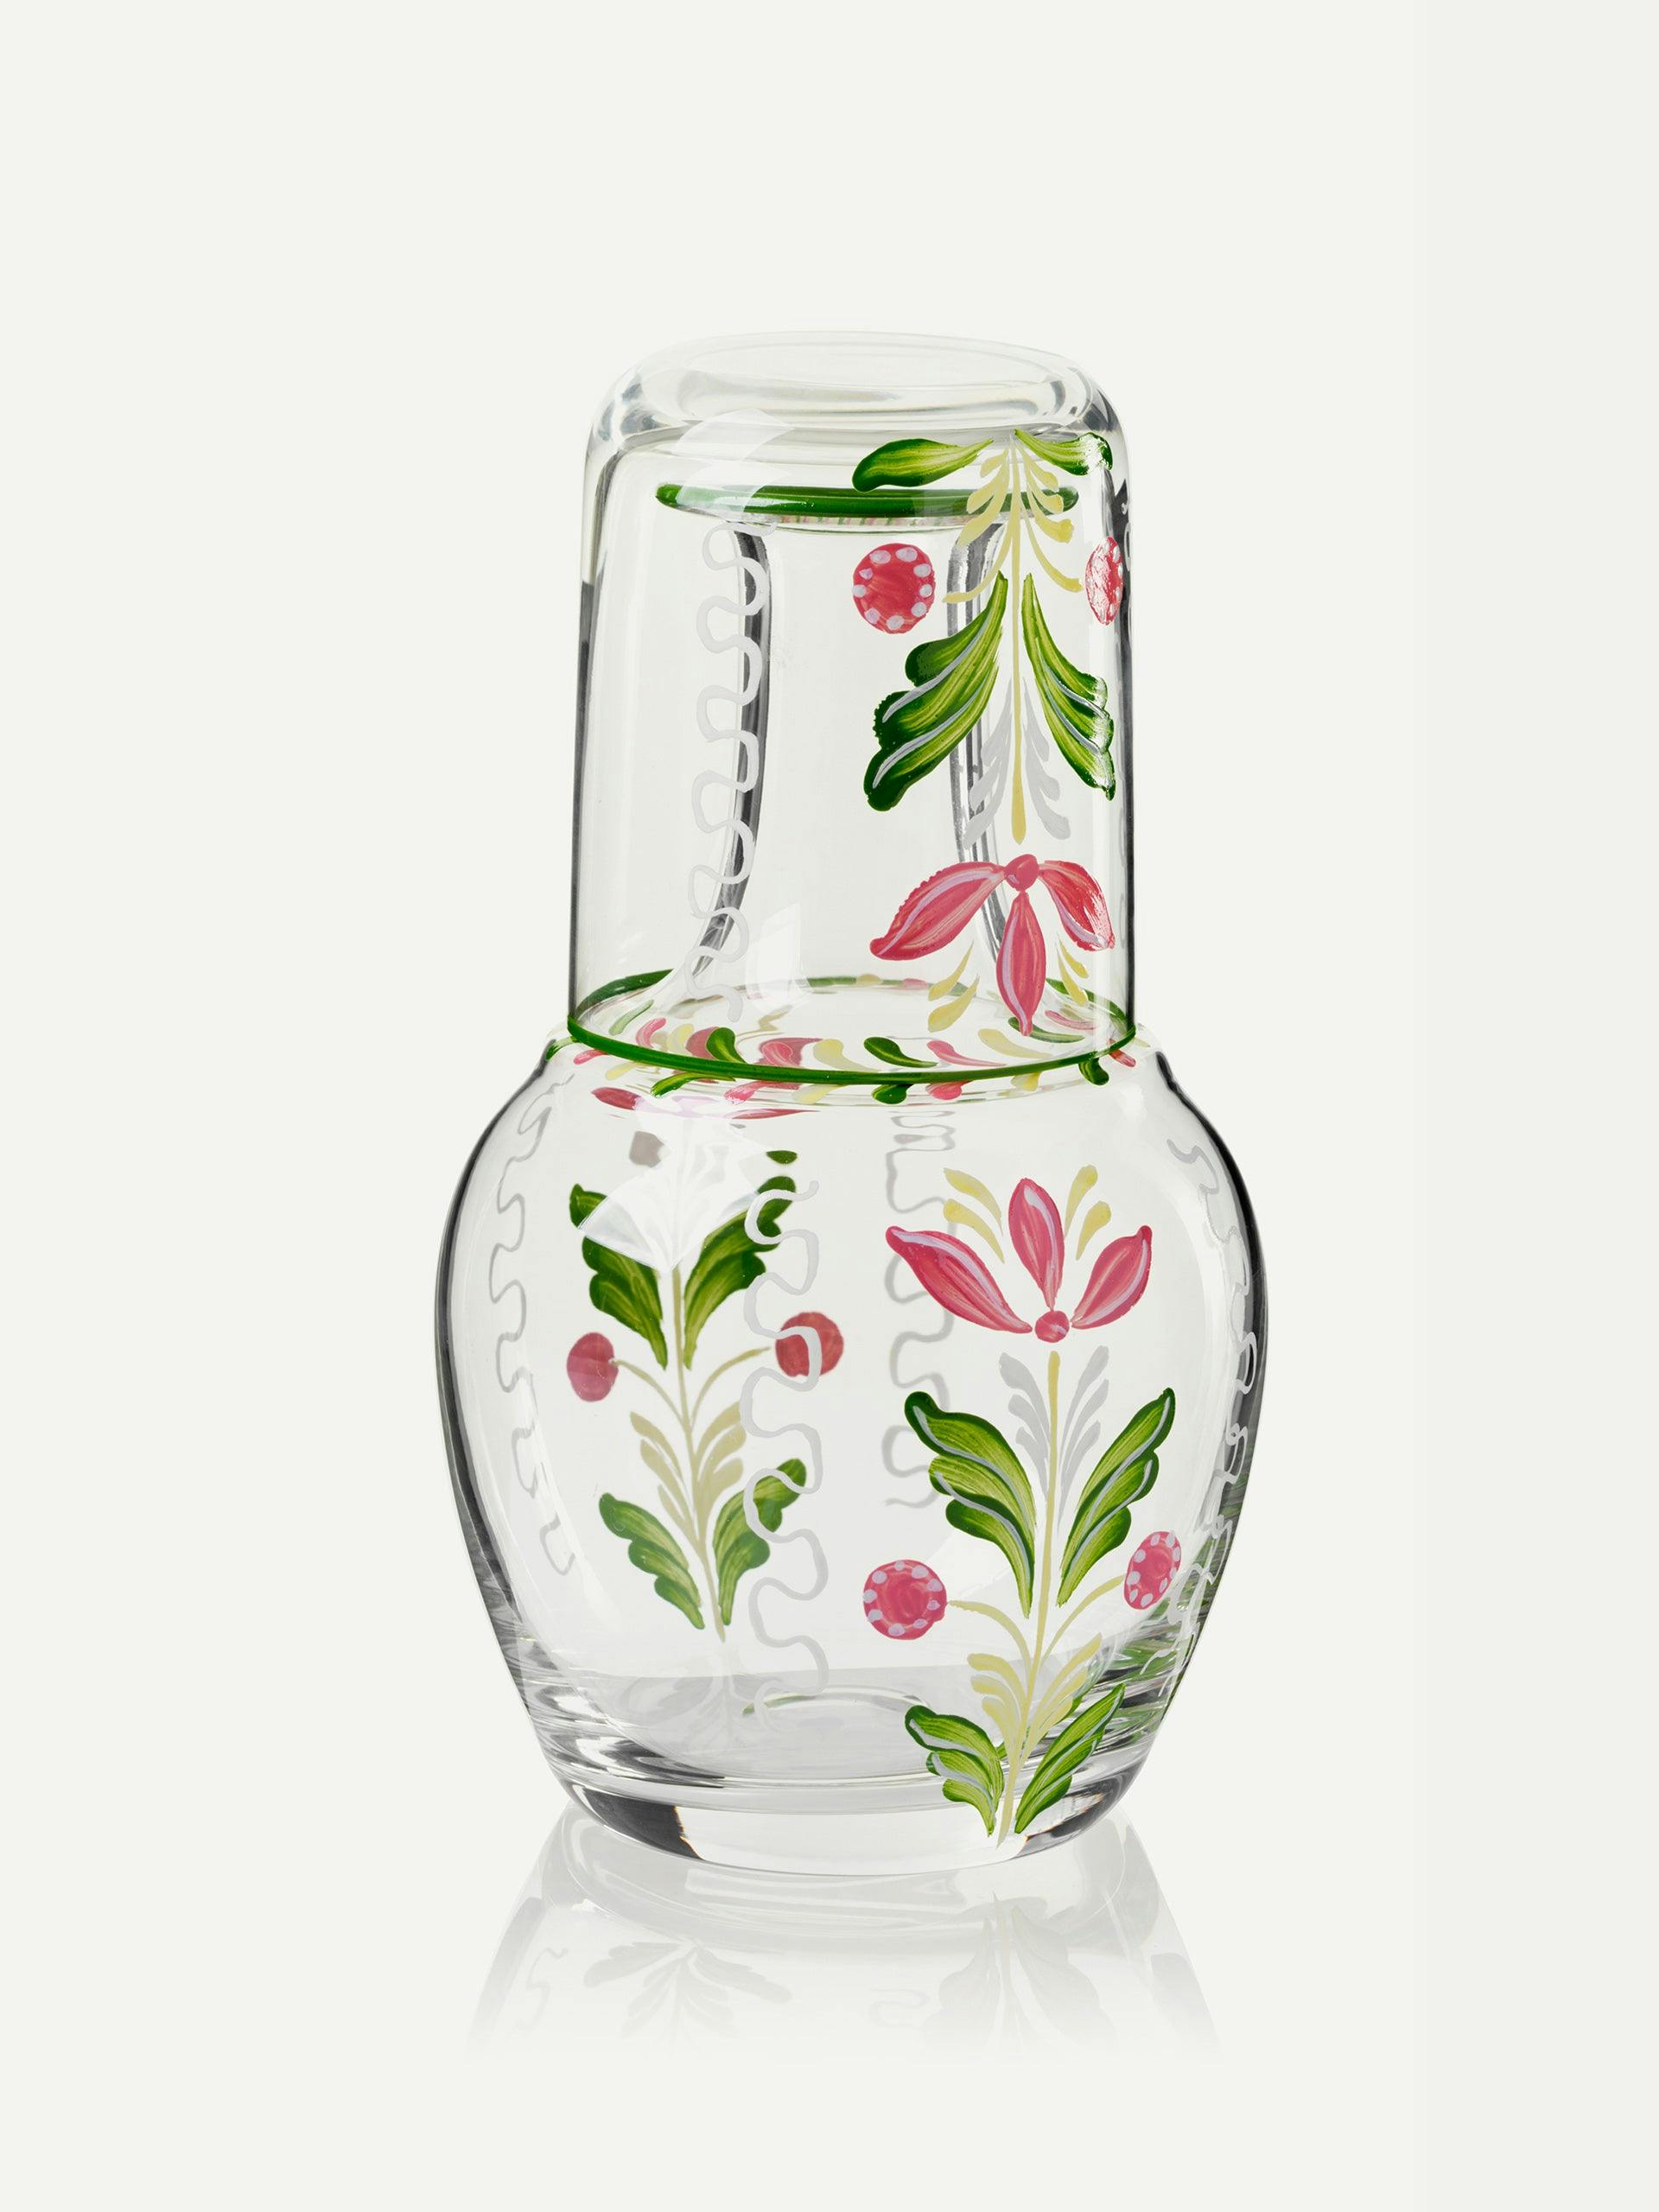 Floral glass and carafe set